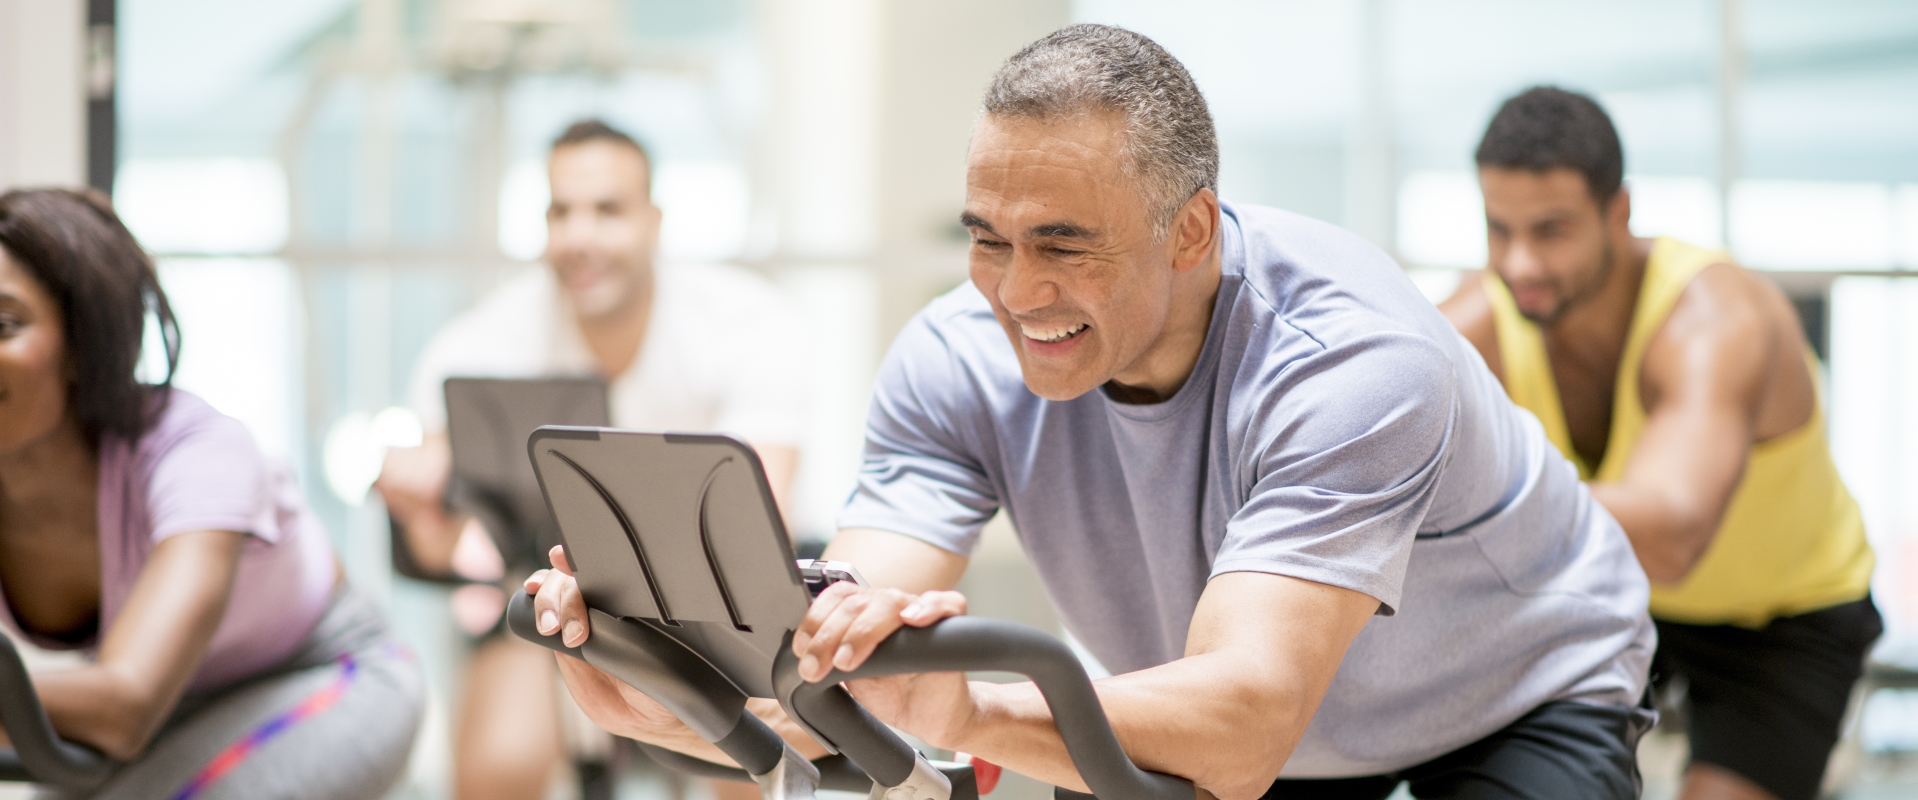 iStock-596804694%20-%20Cycling%20Class%20at%20the%20Gym%20-%20EVENT%20PAGE%201920%20X%20800.jpg